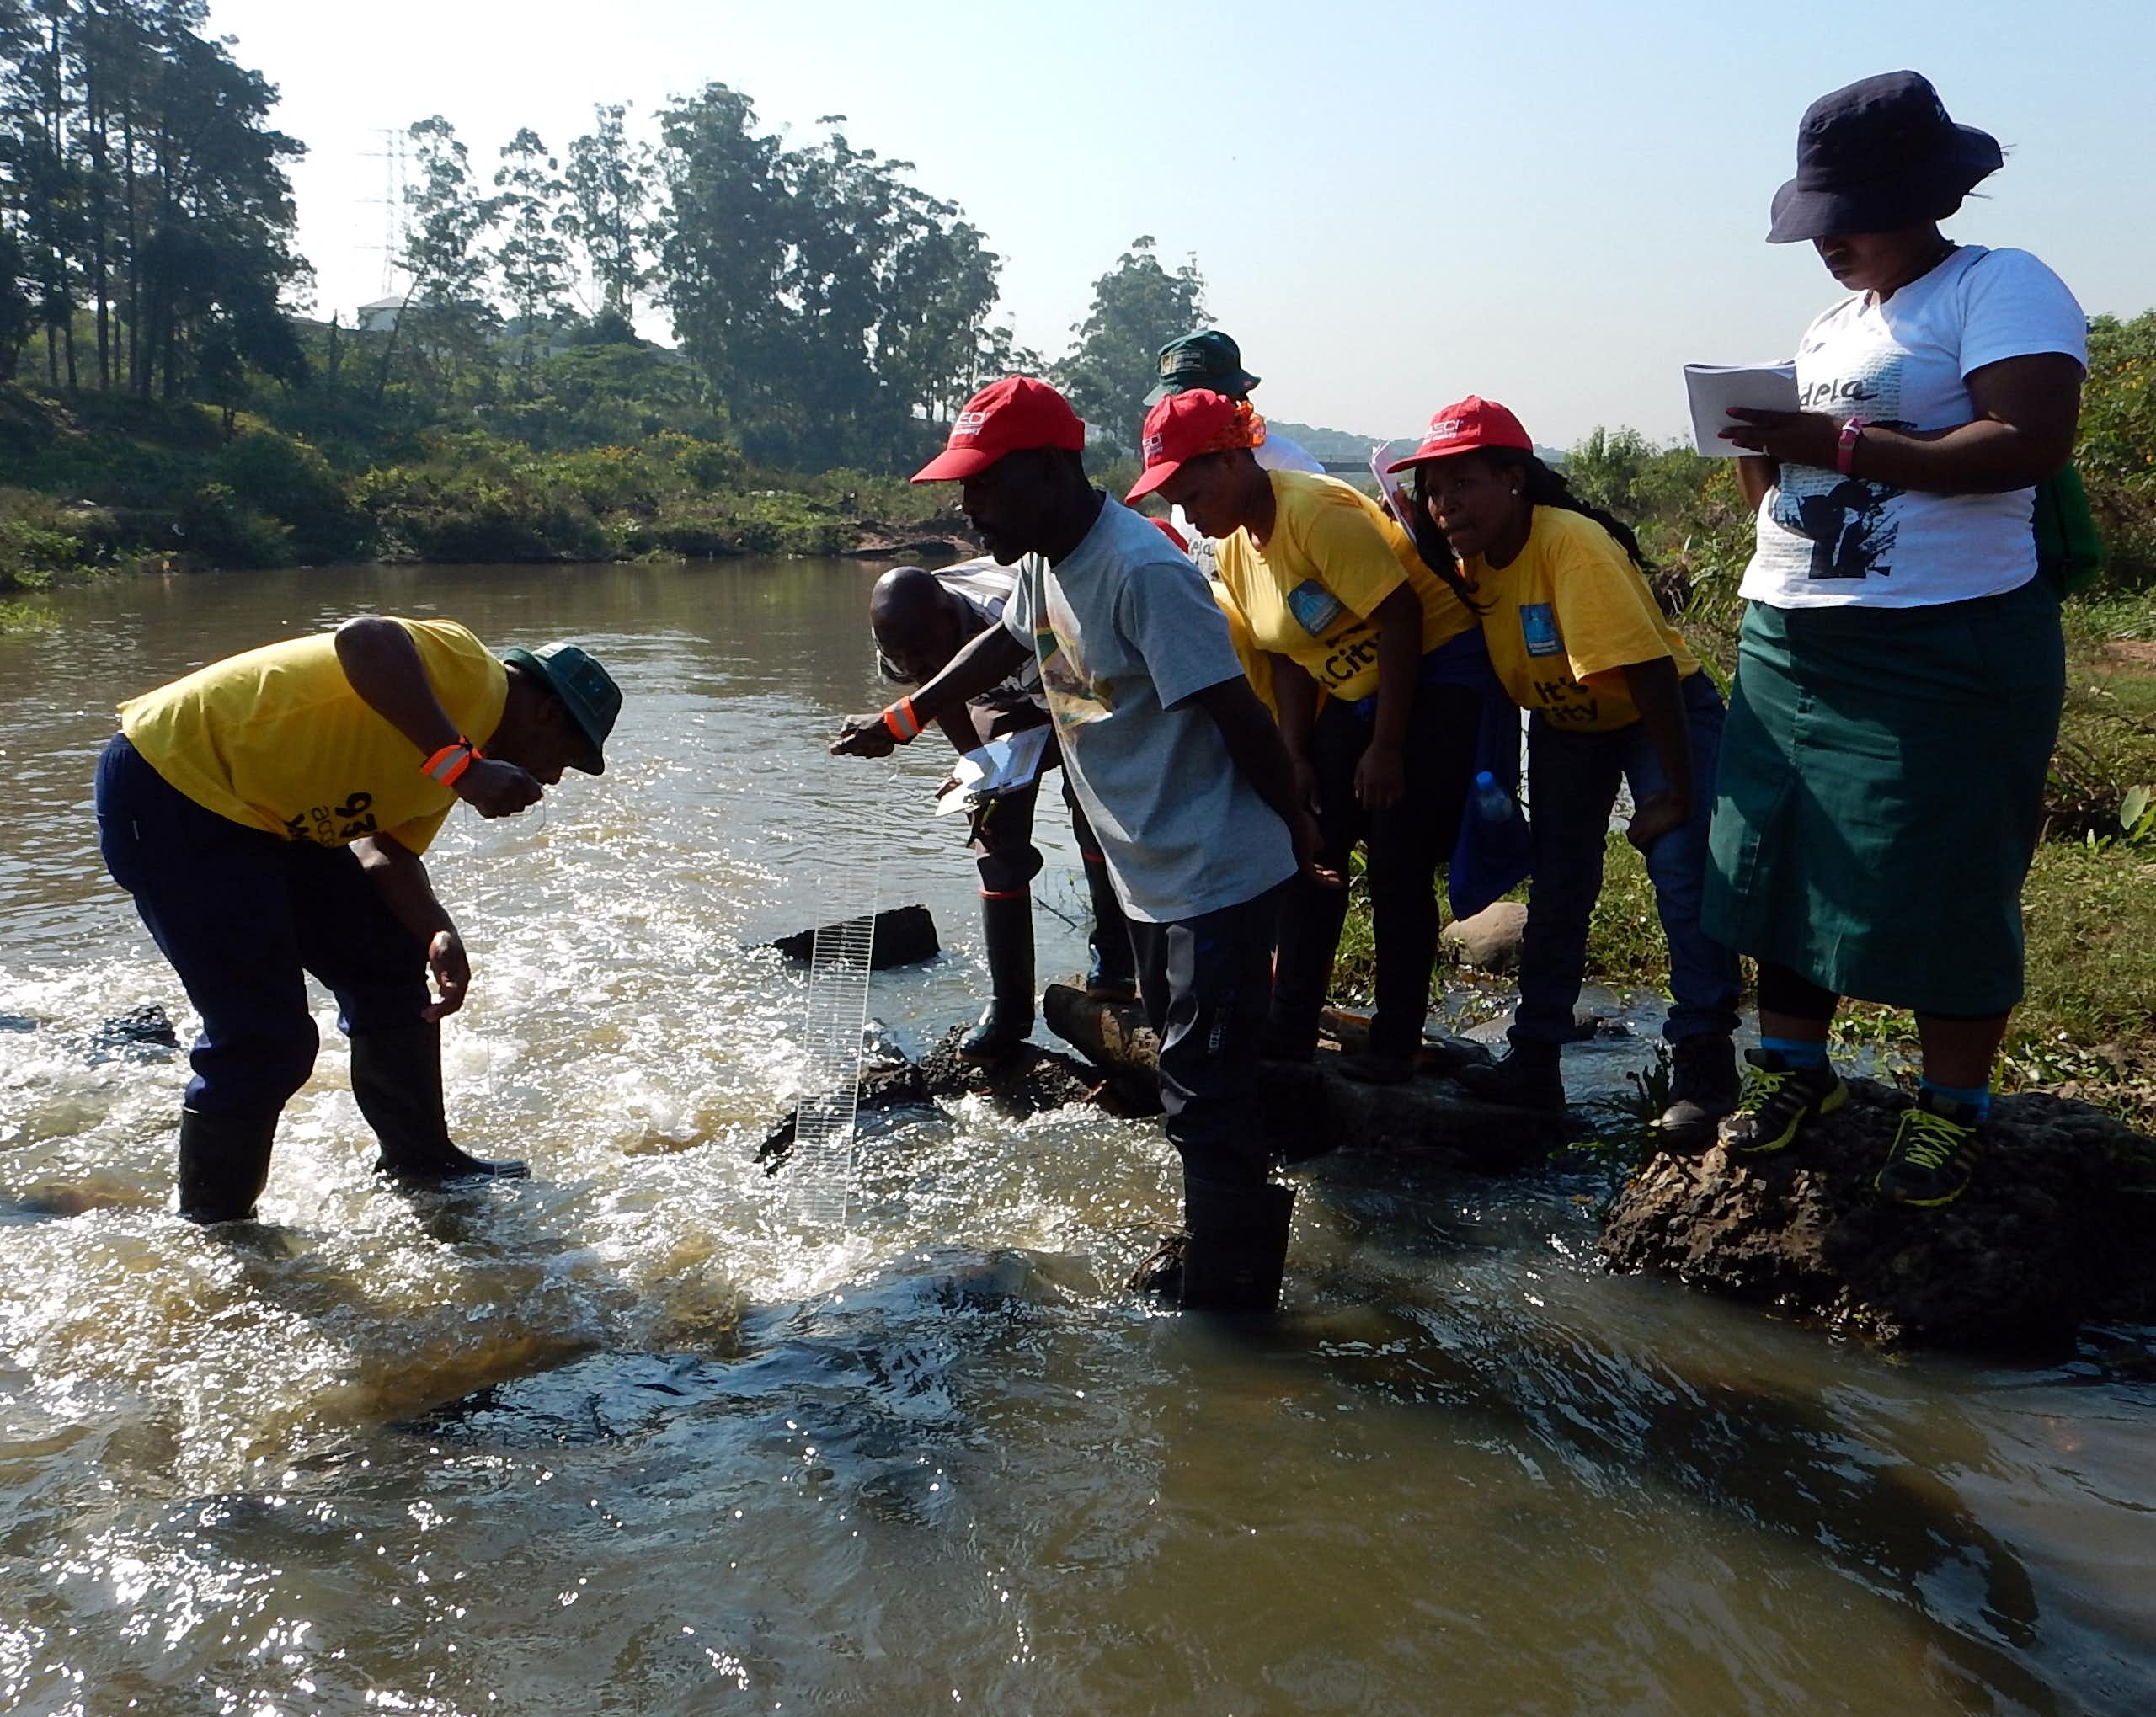 A group of young people in yellow tshirts and red caps stand in a shallow stream using equipment to check the water quality